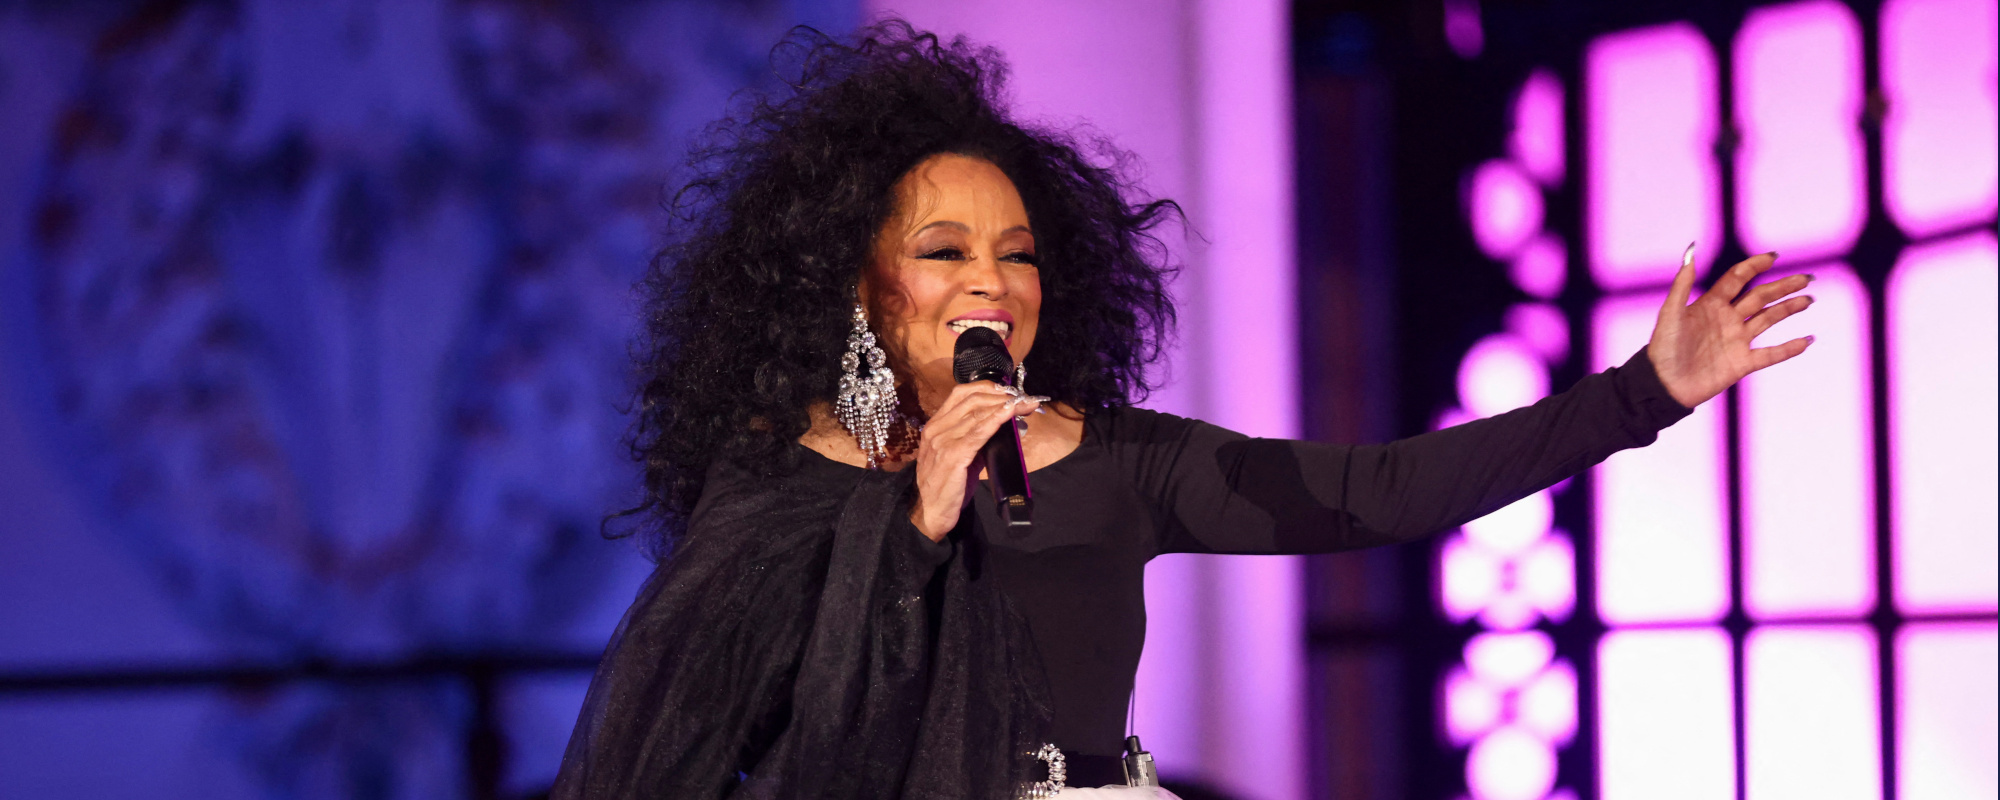 Diana Ross Closes Out Jubilee Platinum Party With “Aint No Mountain High Enough”